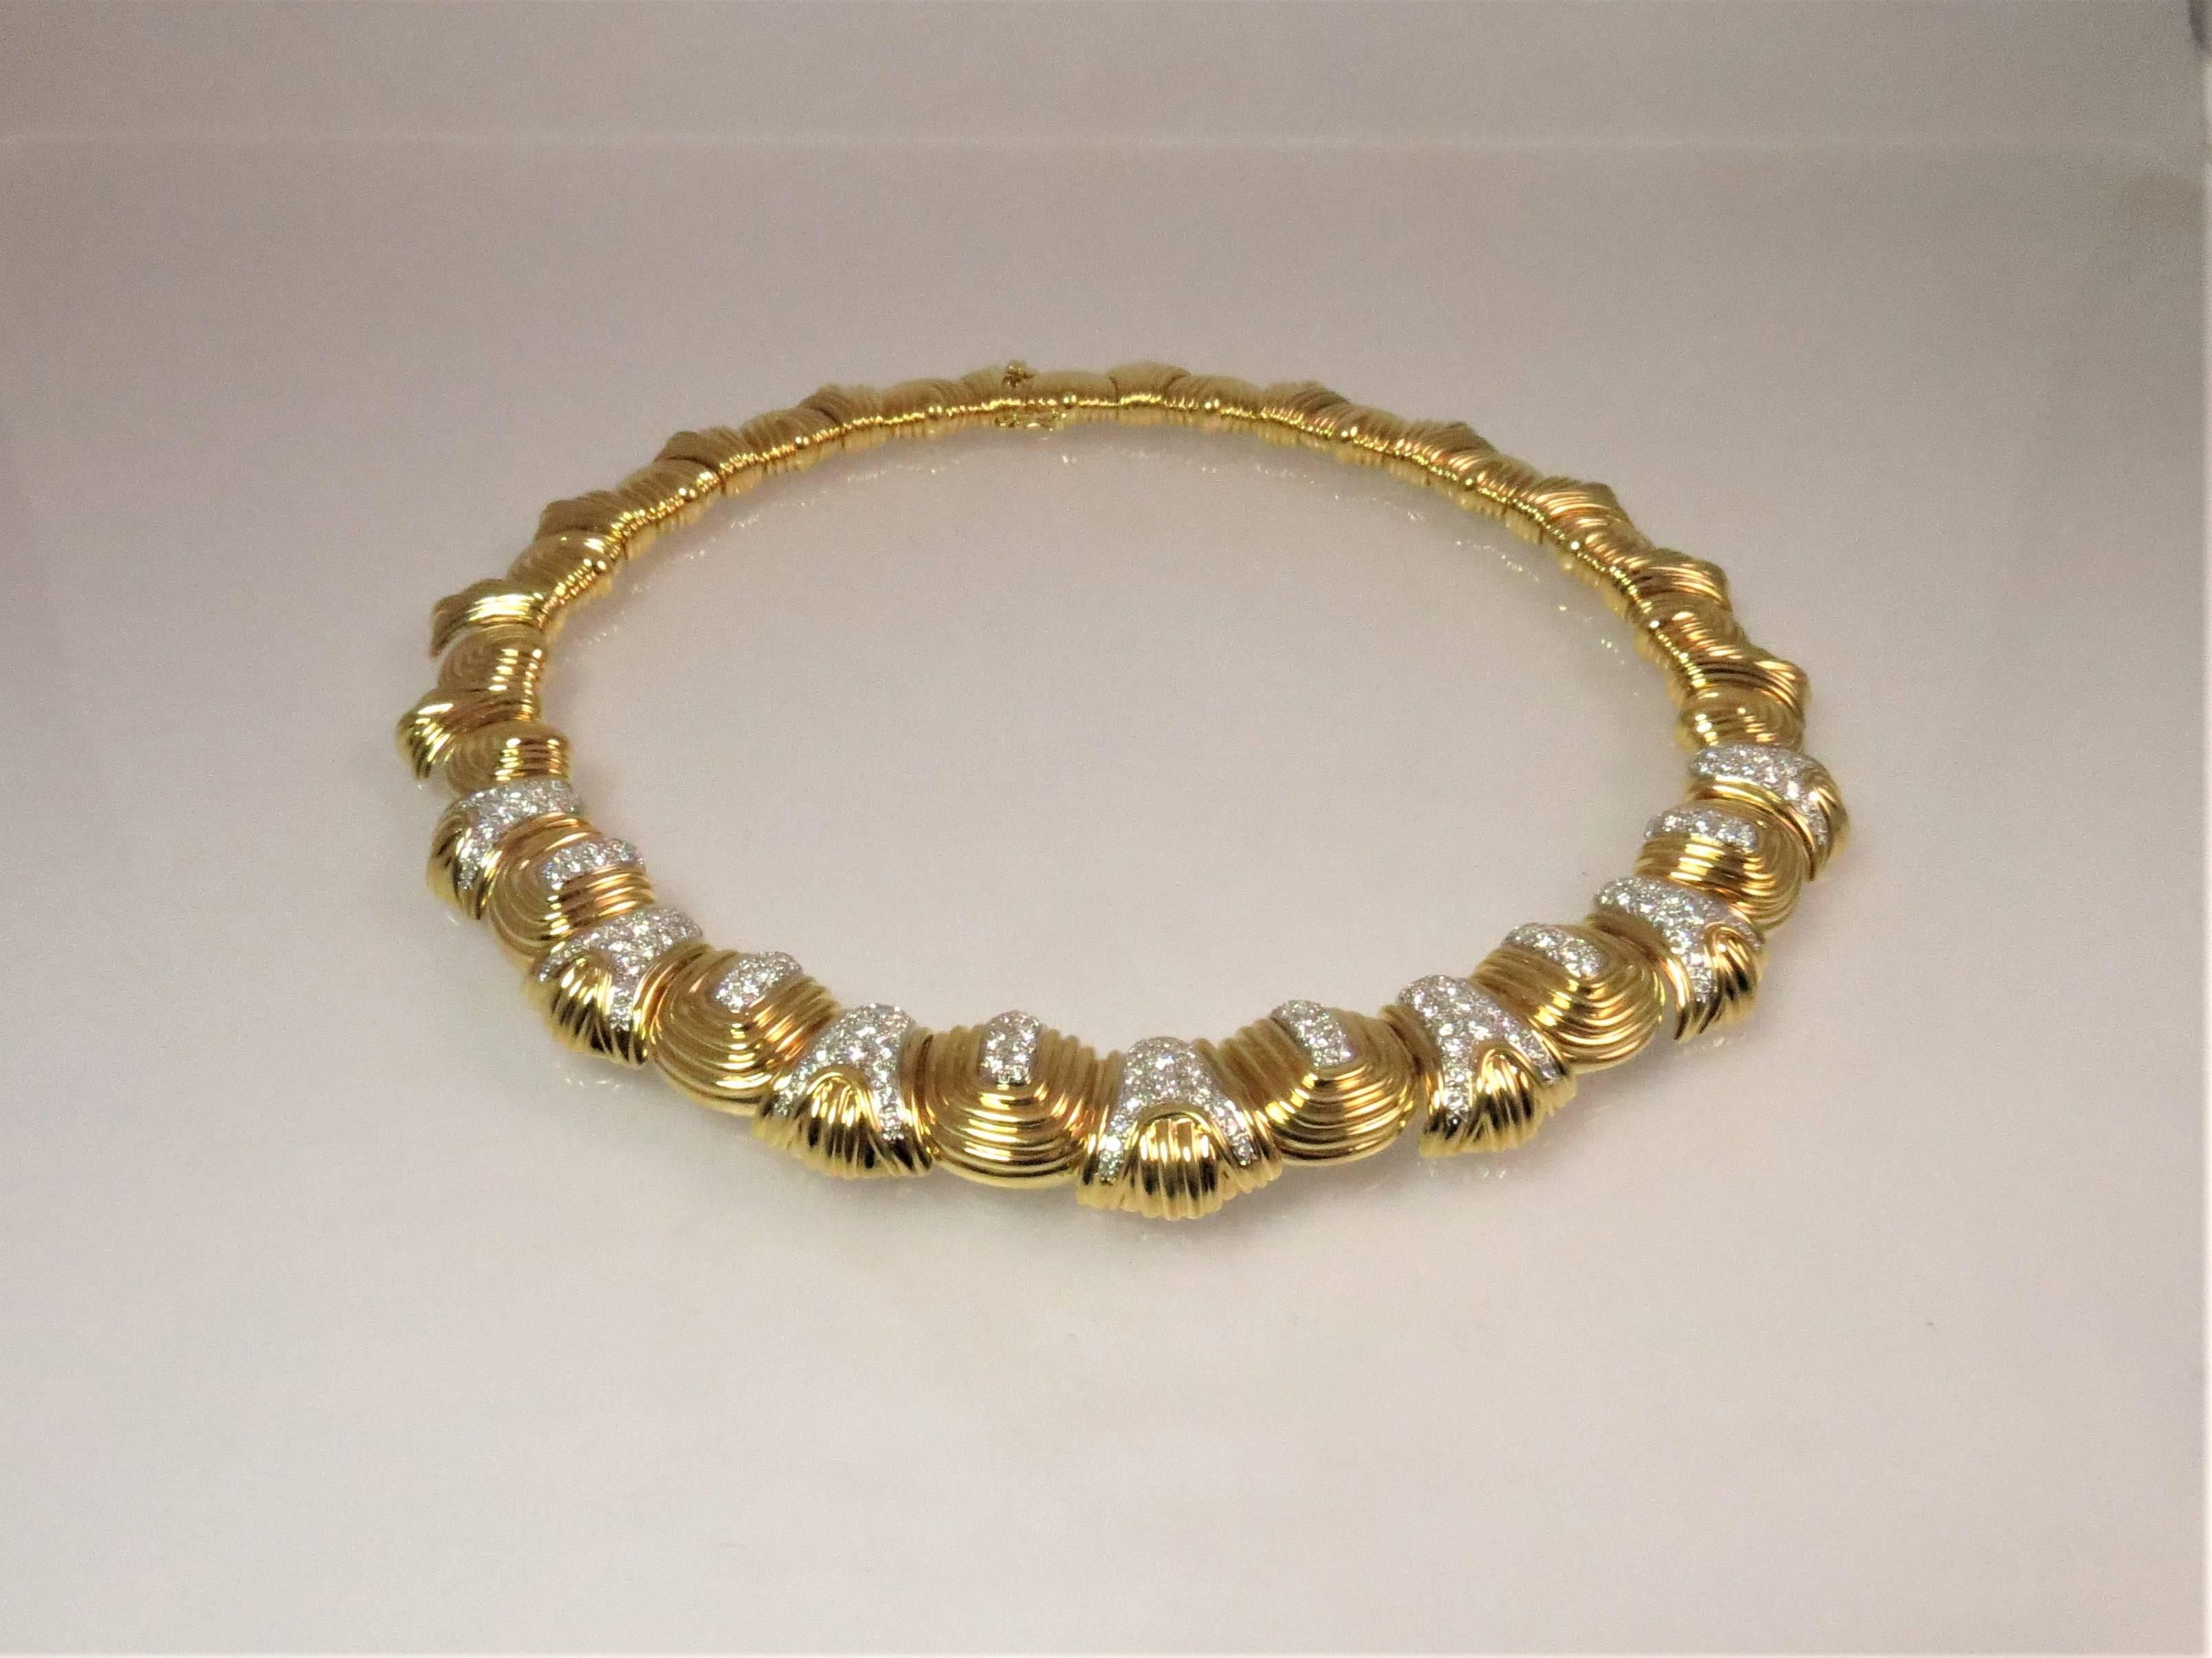  Stunning Montreaux 18K yellow gold necklace with 195 full cut round diamonds (set in platinum)  weighing 5.10cts, D-E color, IF and VVS1 color.